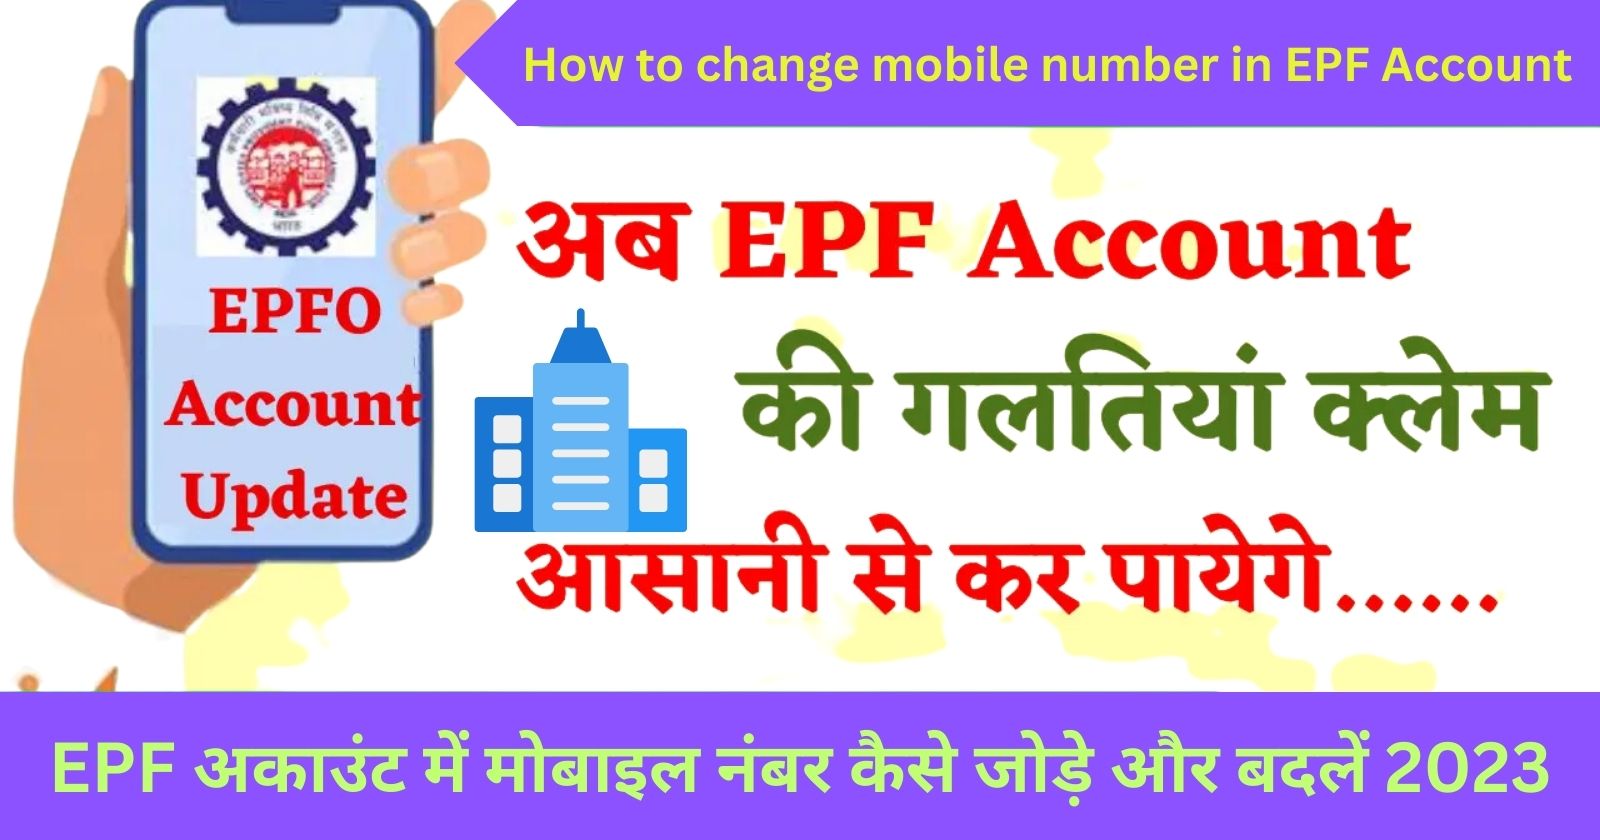 How to change mobile number in EPF Account